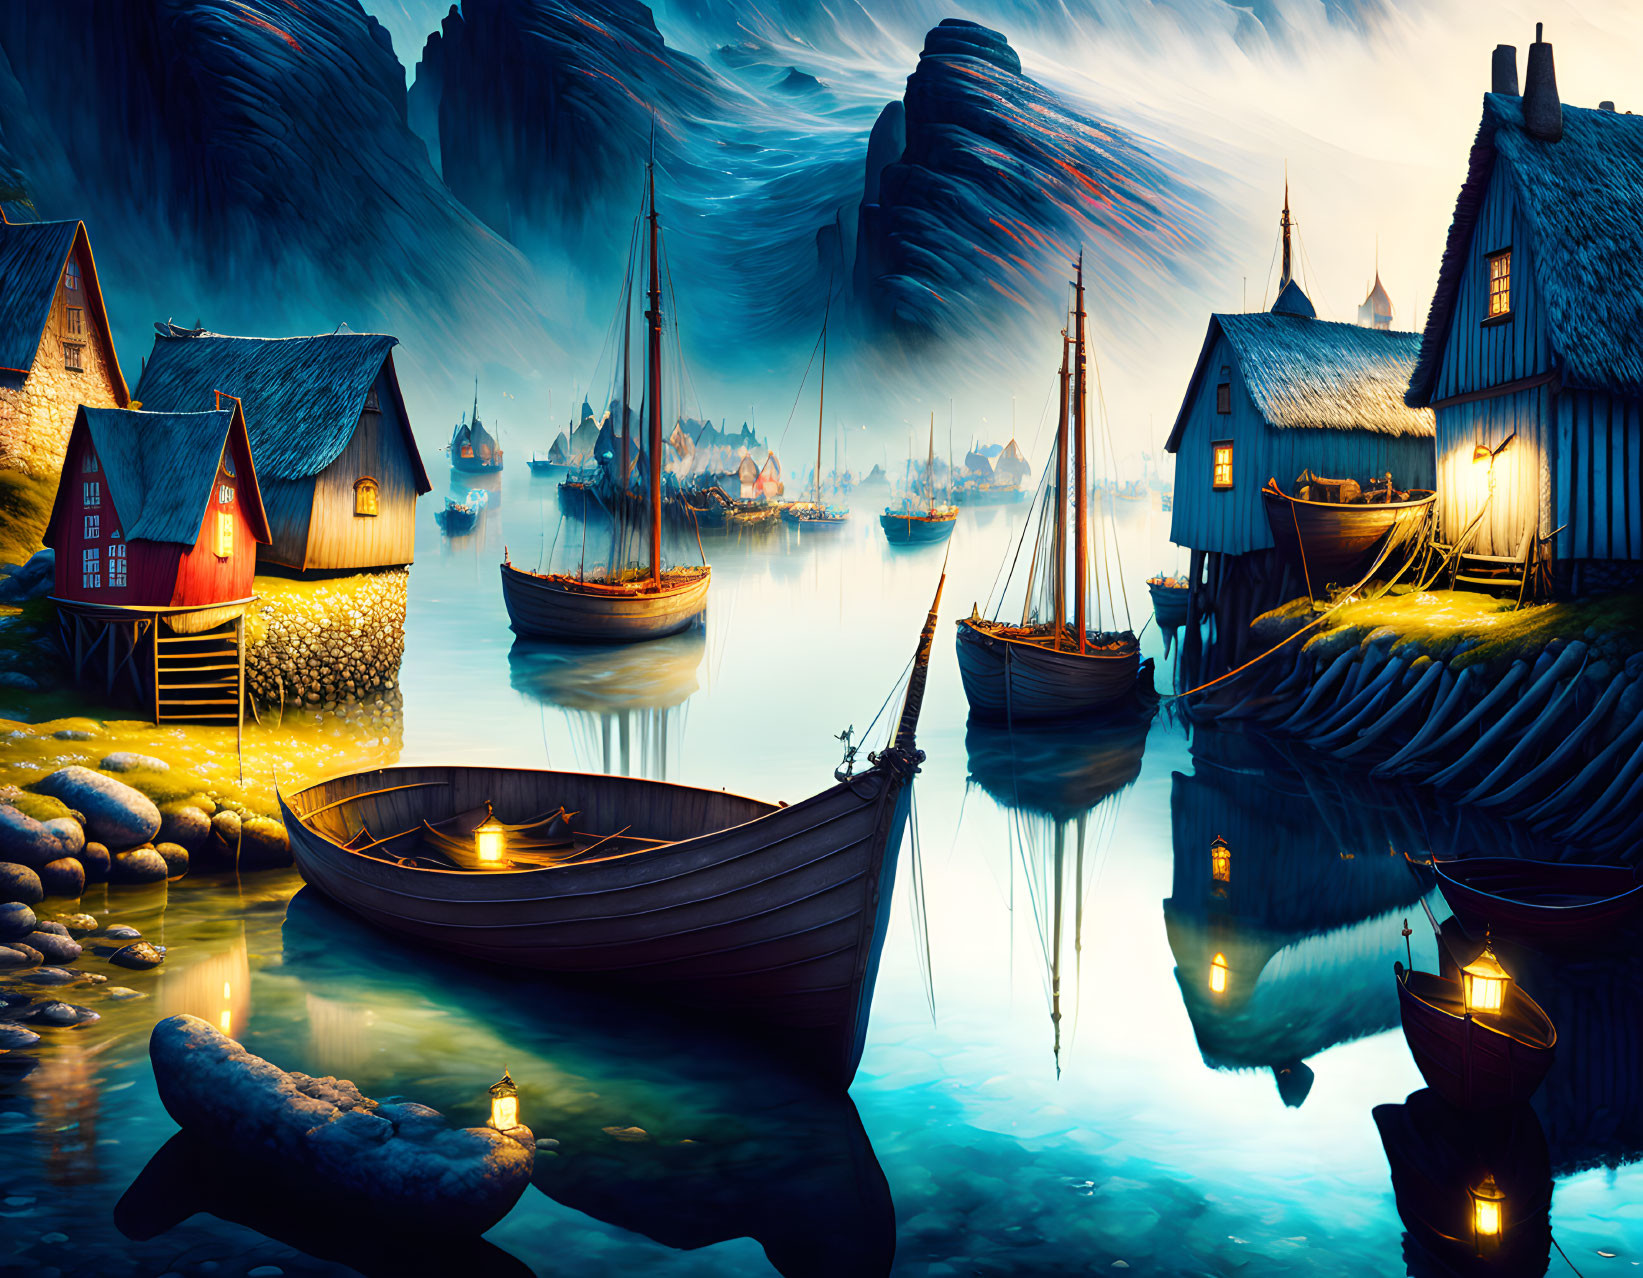 Coastal Village at Dusk with Wooden Houses, Docks, Boats, and Dramatic